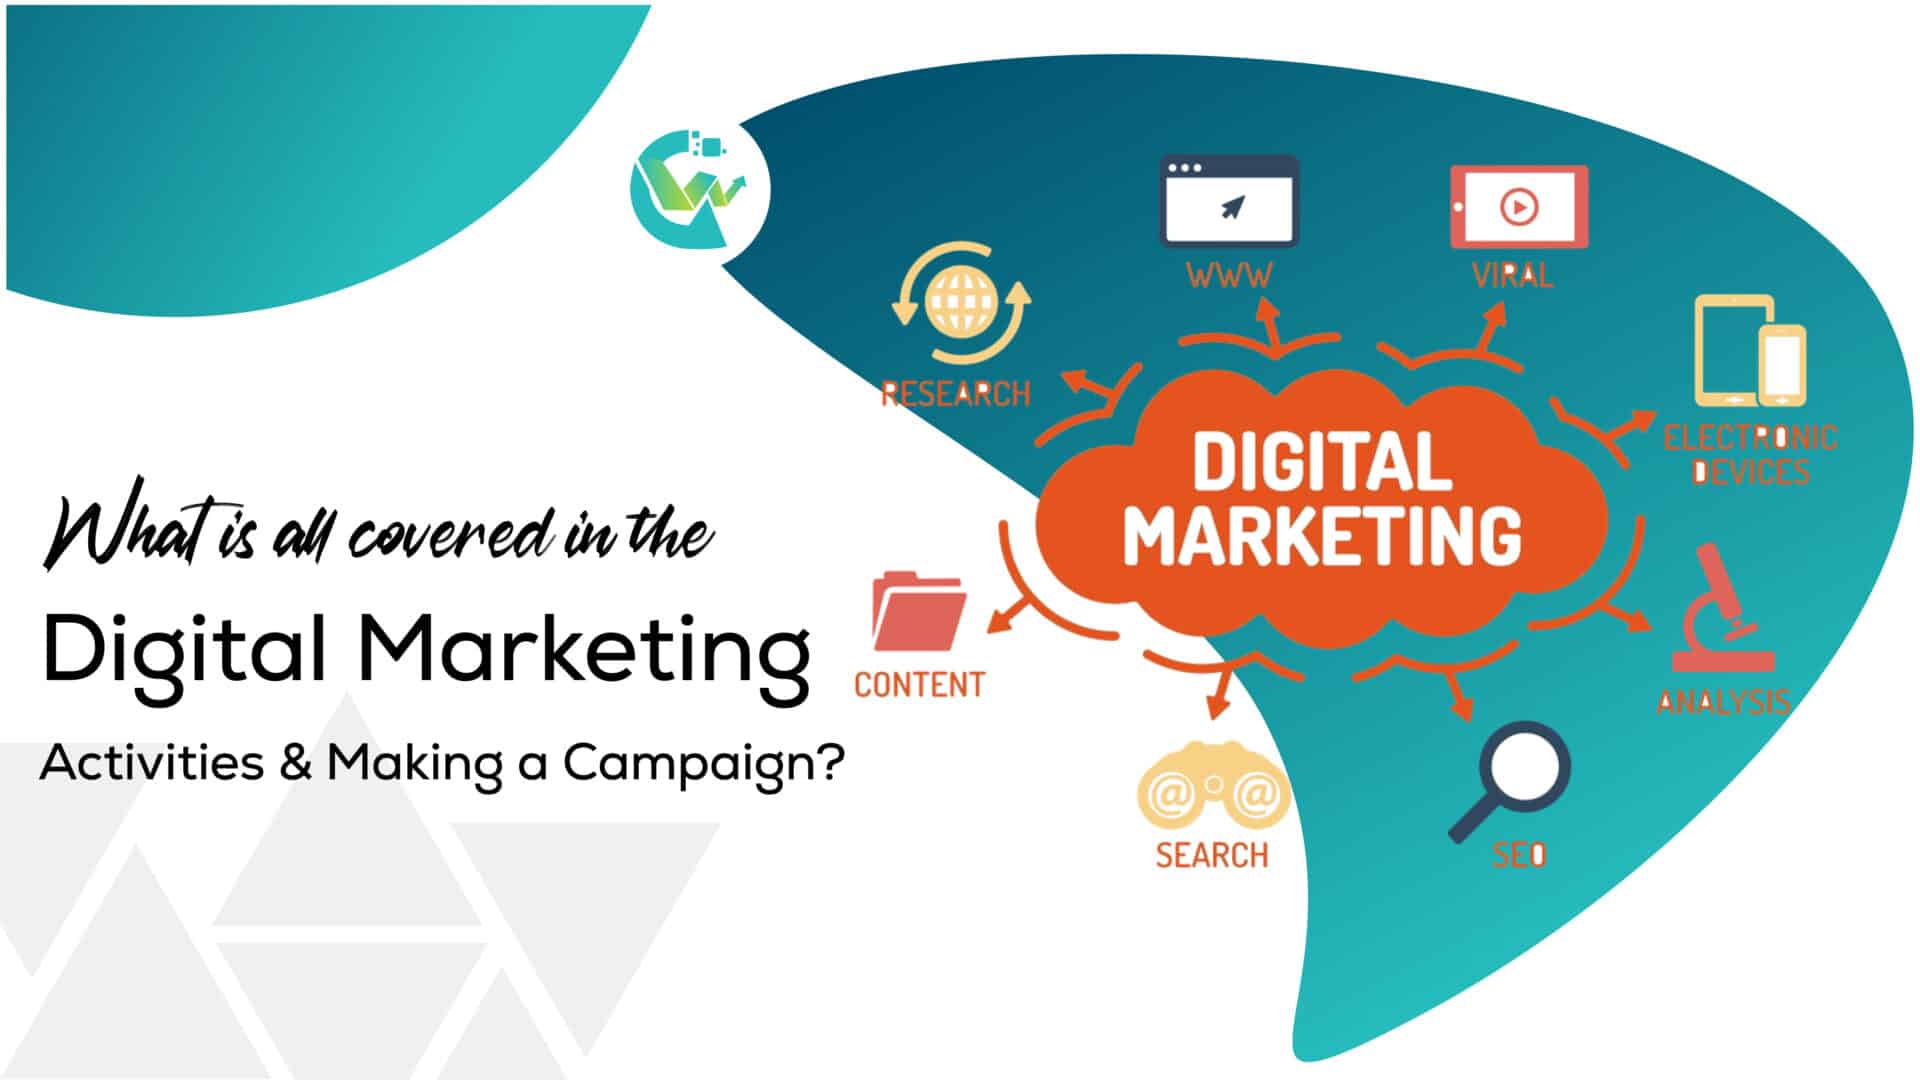 Digital Marketing: What is Covered in Activities & Campaign?